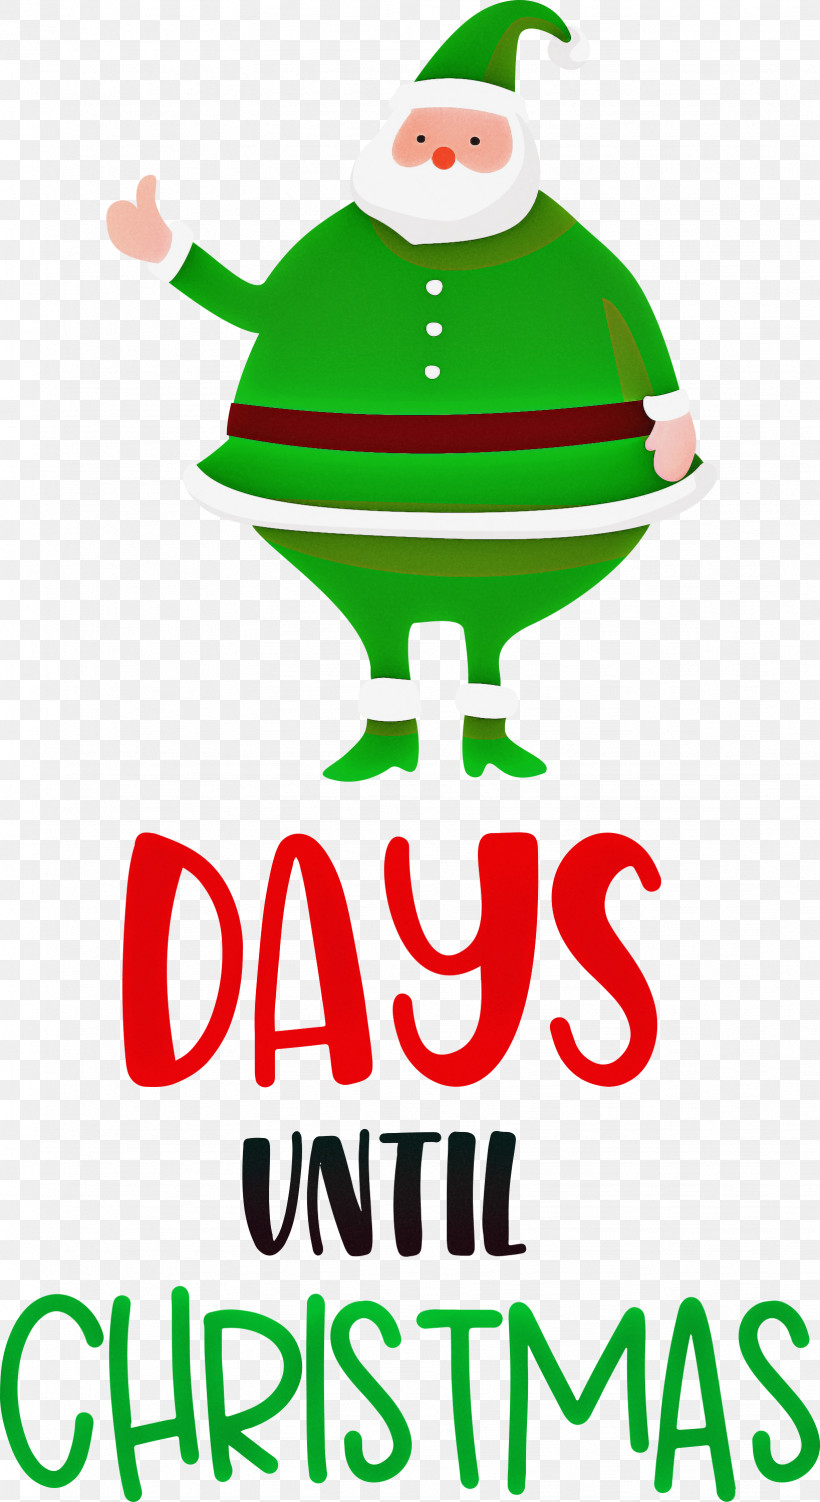 Days Until Christmas Christmas Santa Claus, PNG, 1637x3000px, Days Until Christmas, Character, Christmas, Christmas Day, Christmas Ornament Download Free